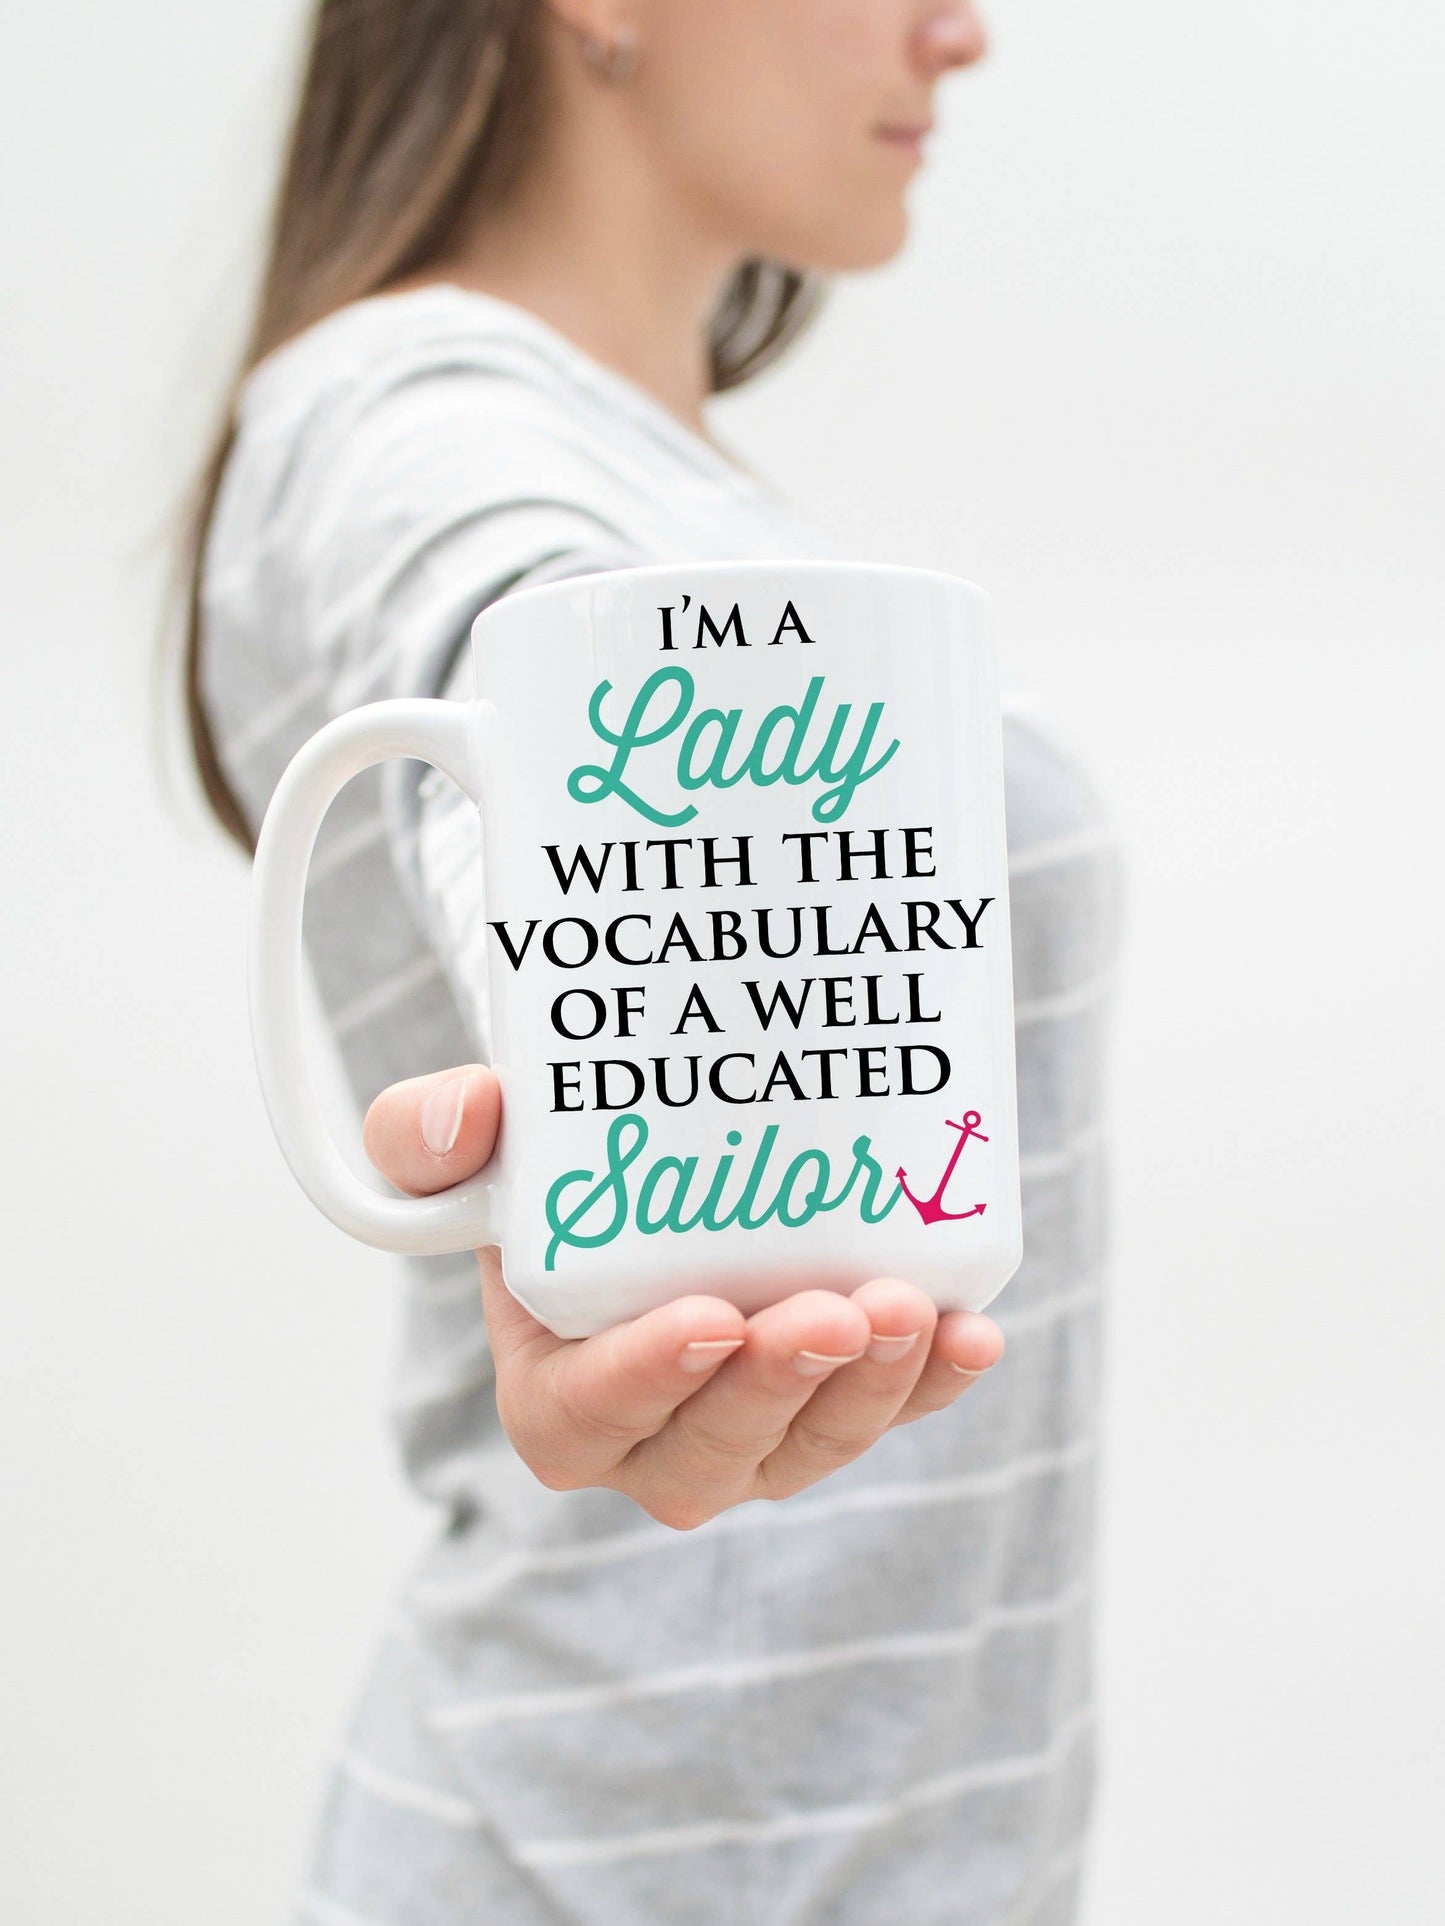 I'm A Lady With The Vocabulary Of A Well Educated Sailor